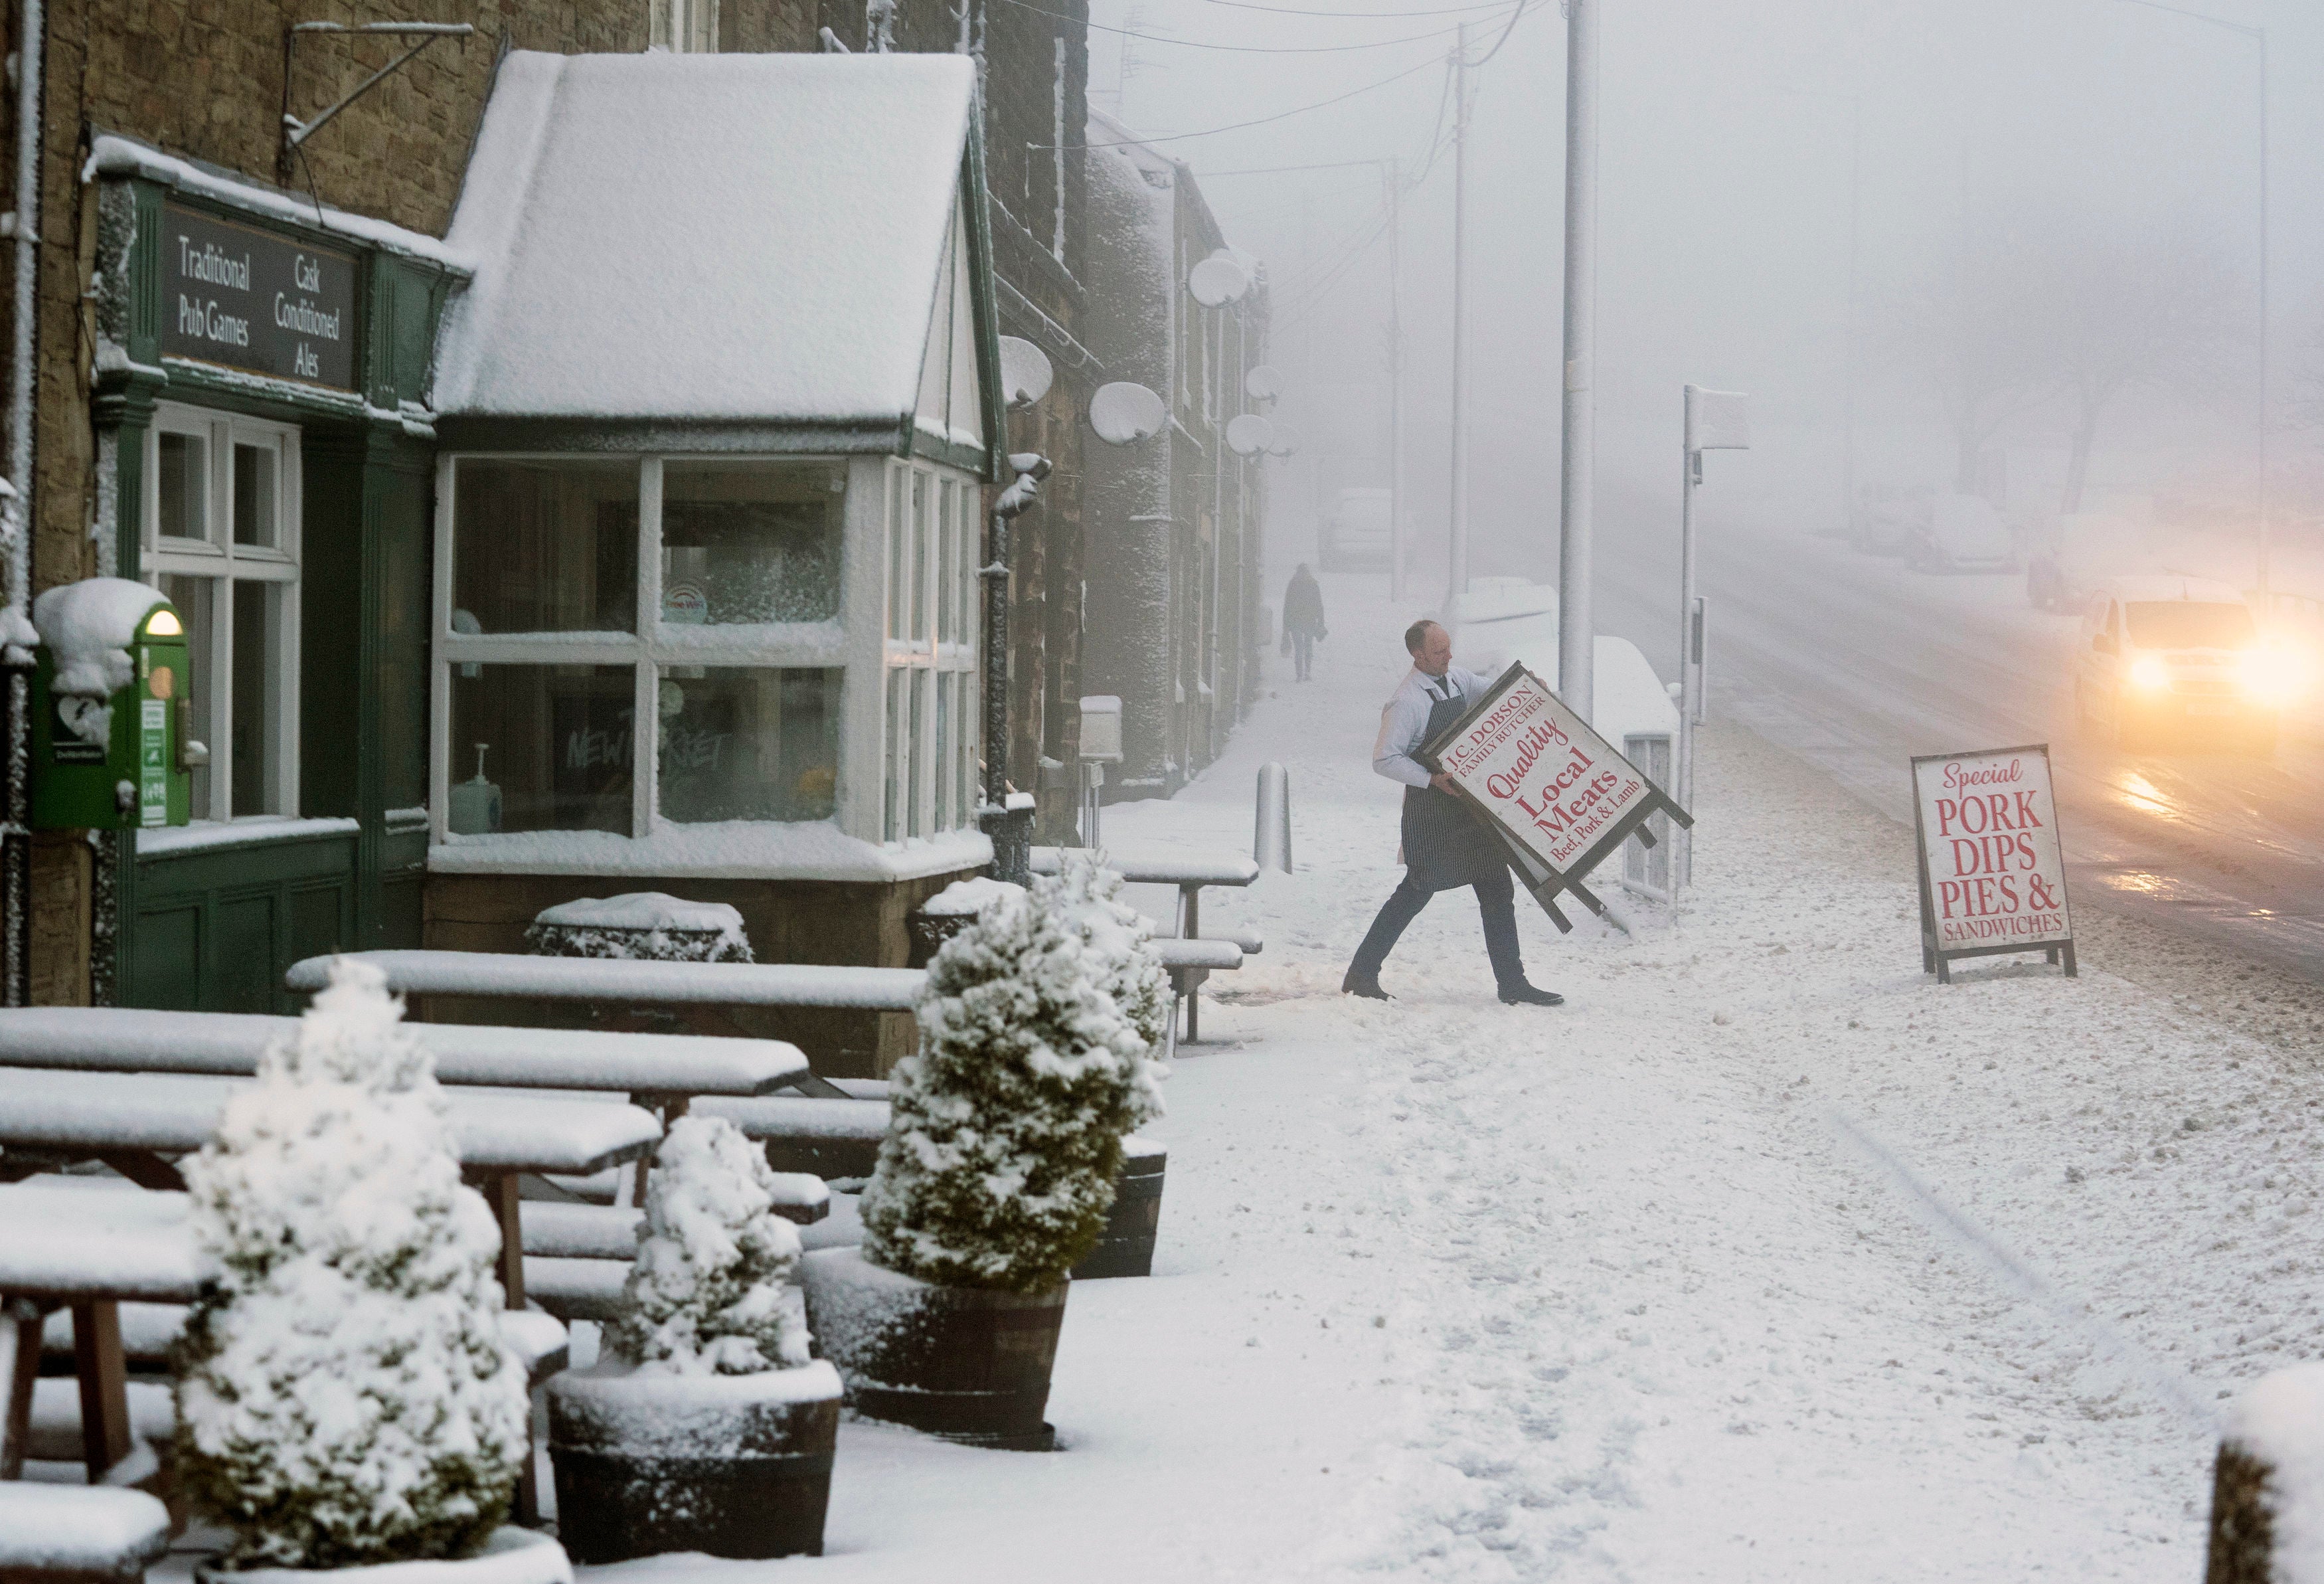 A butcher carries his shop sign across a snowy pavement in Tow Law, County Durham